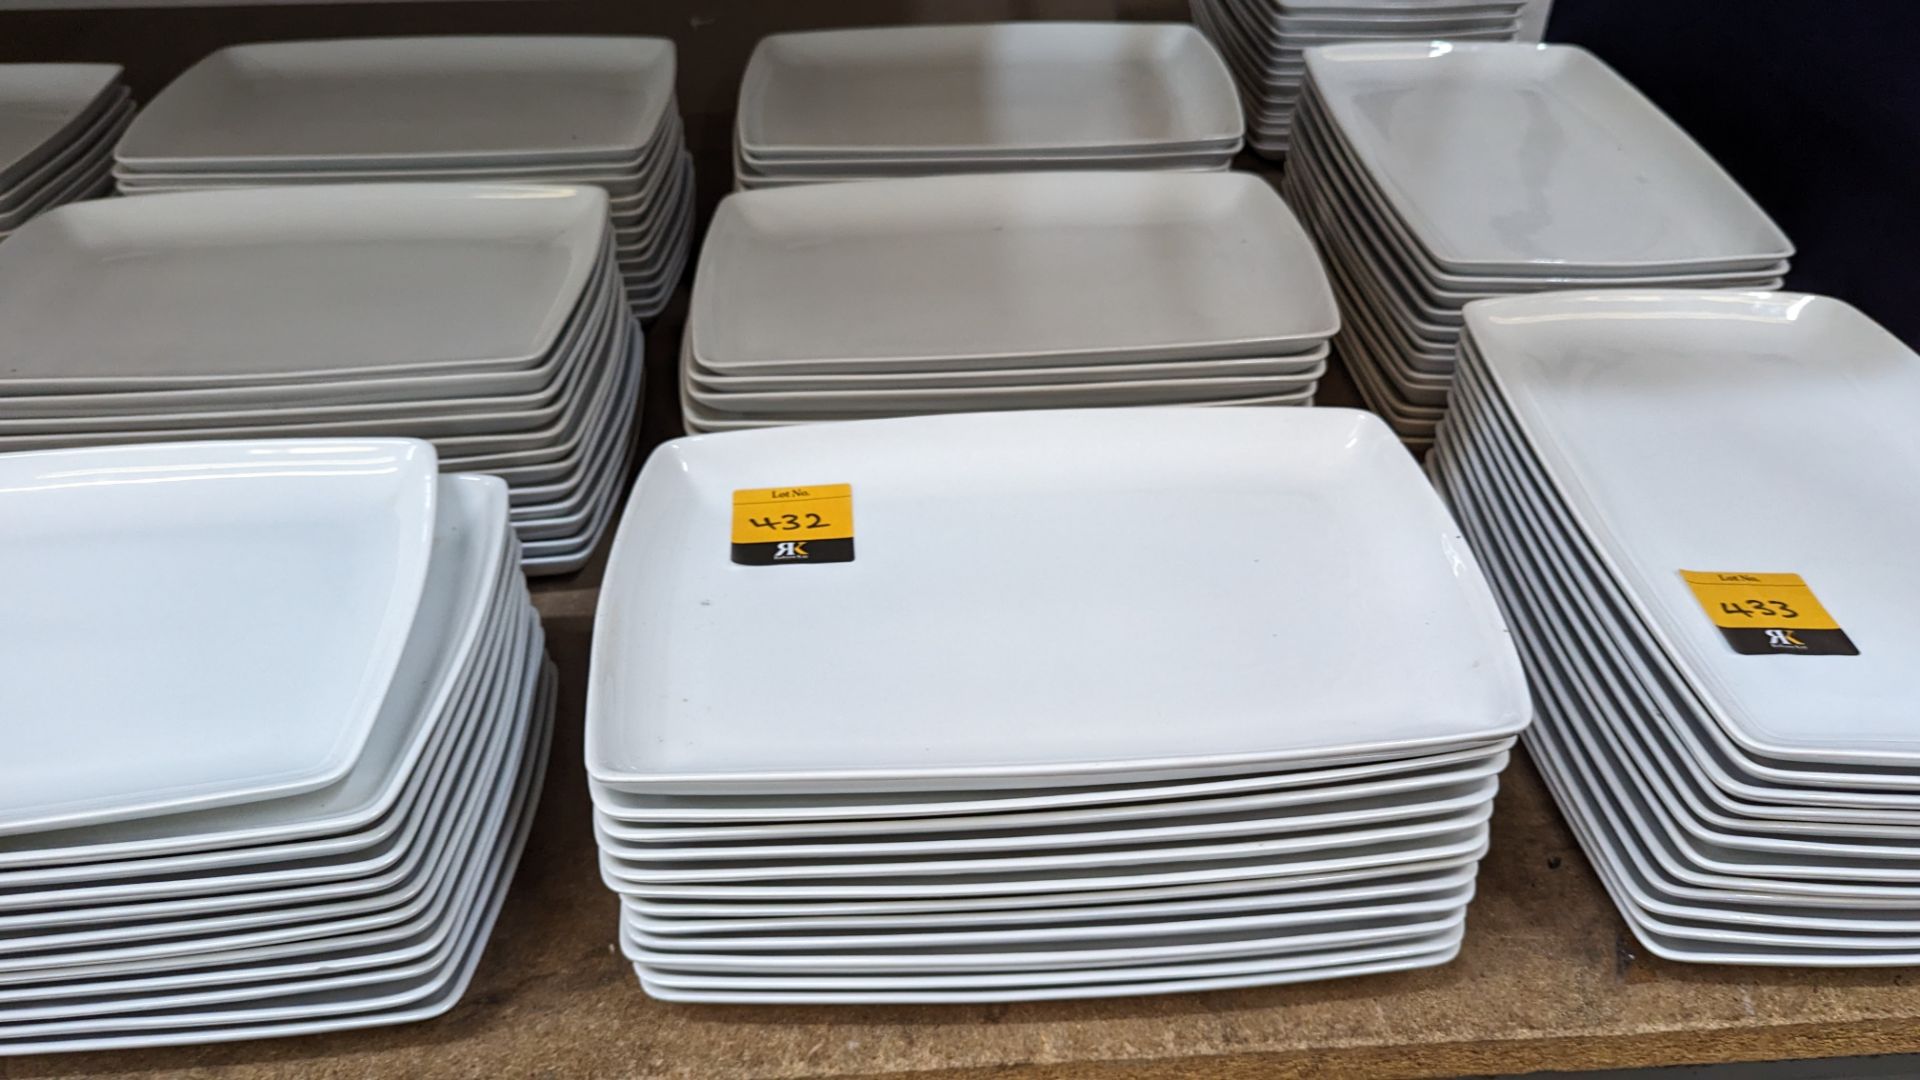 36 off white rectangular plates/small platters each measuring approximately 325mm x 210mm - 3 stacks - Image 2 of 6